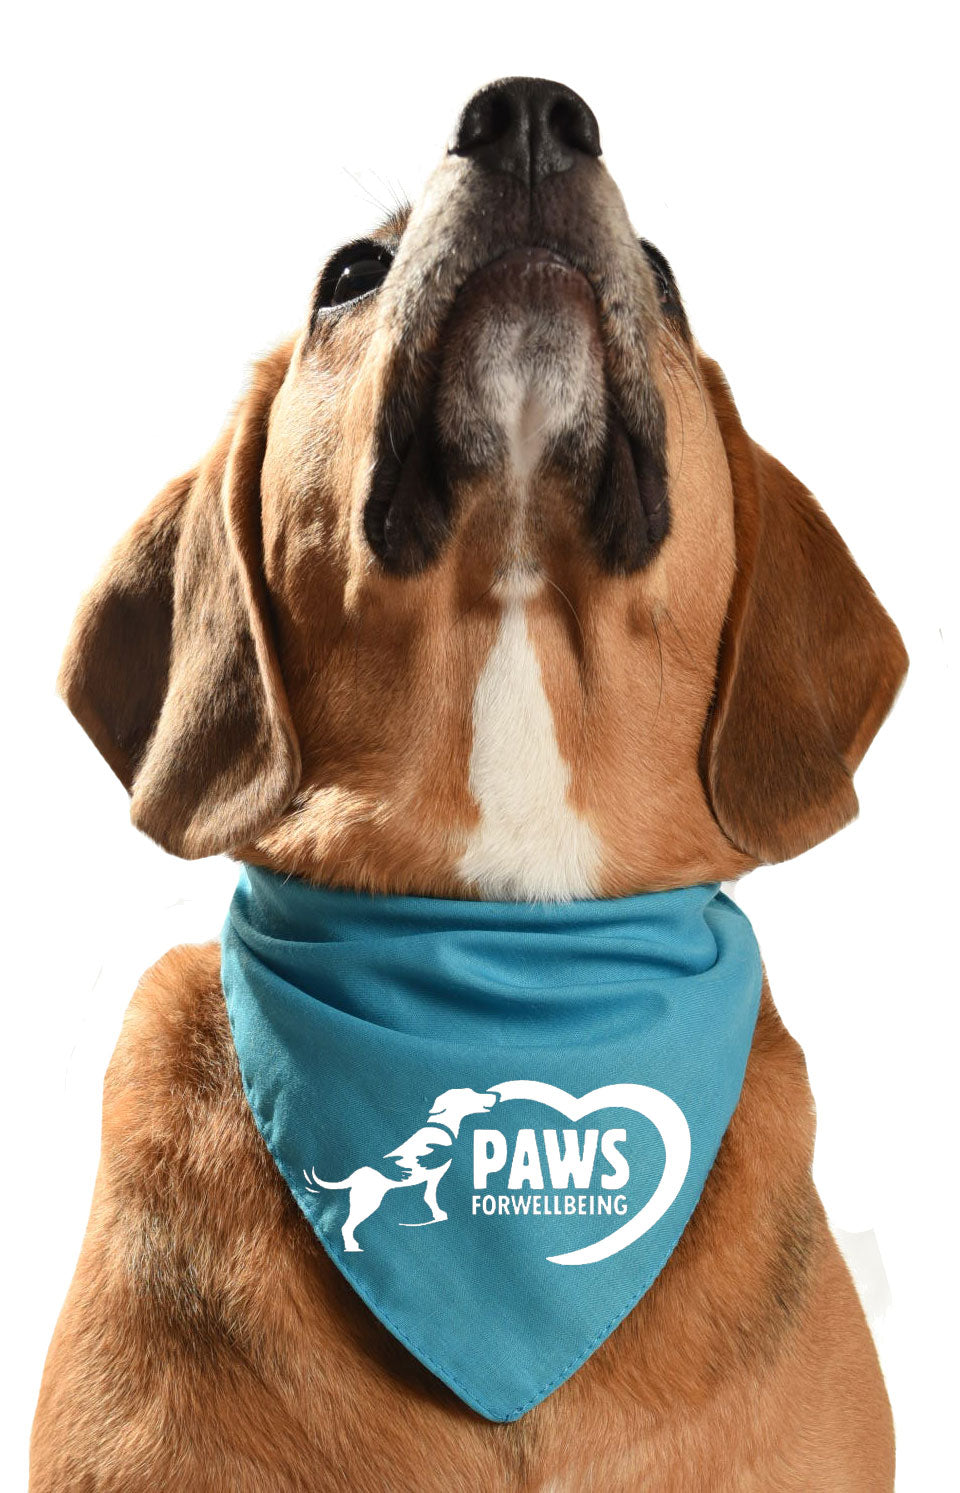 paws for wellbeing charity fundraising dog bandana